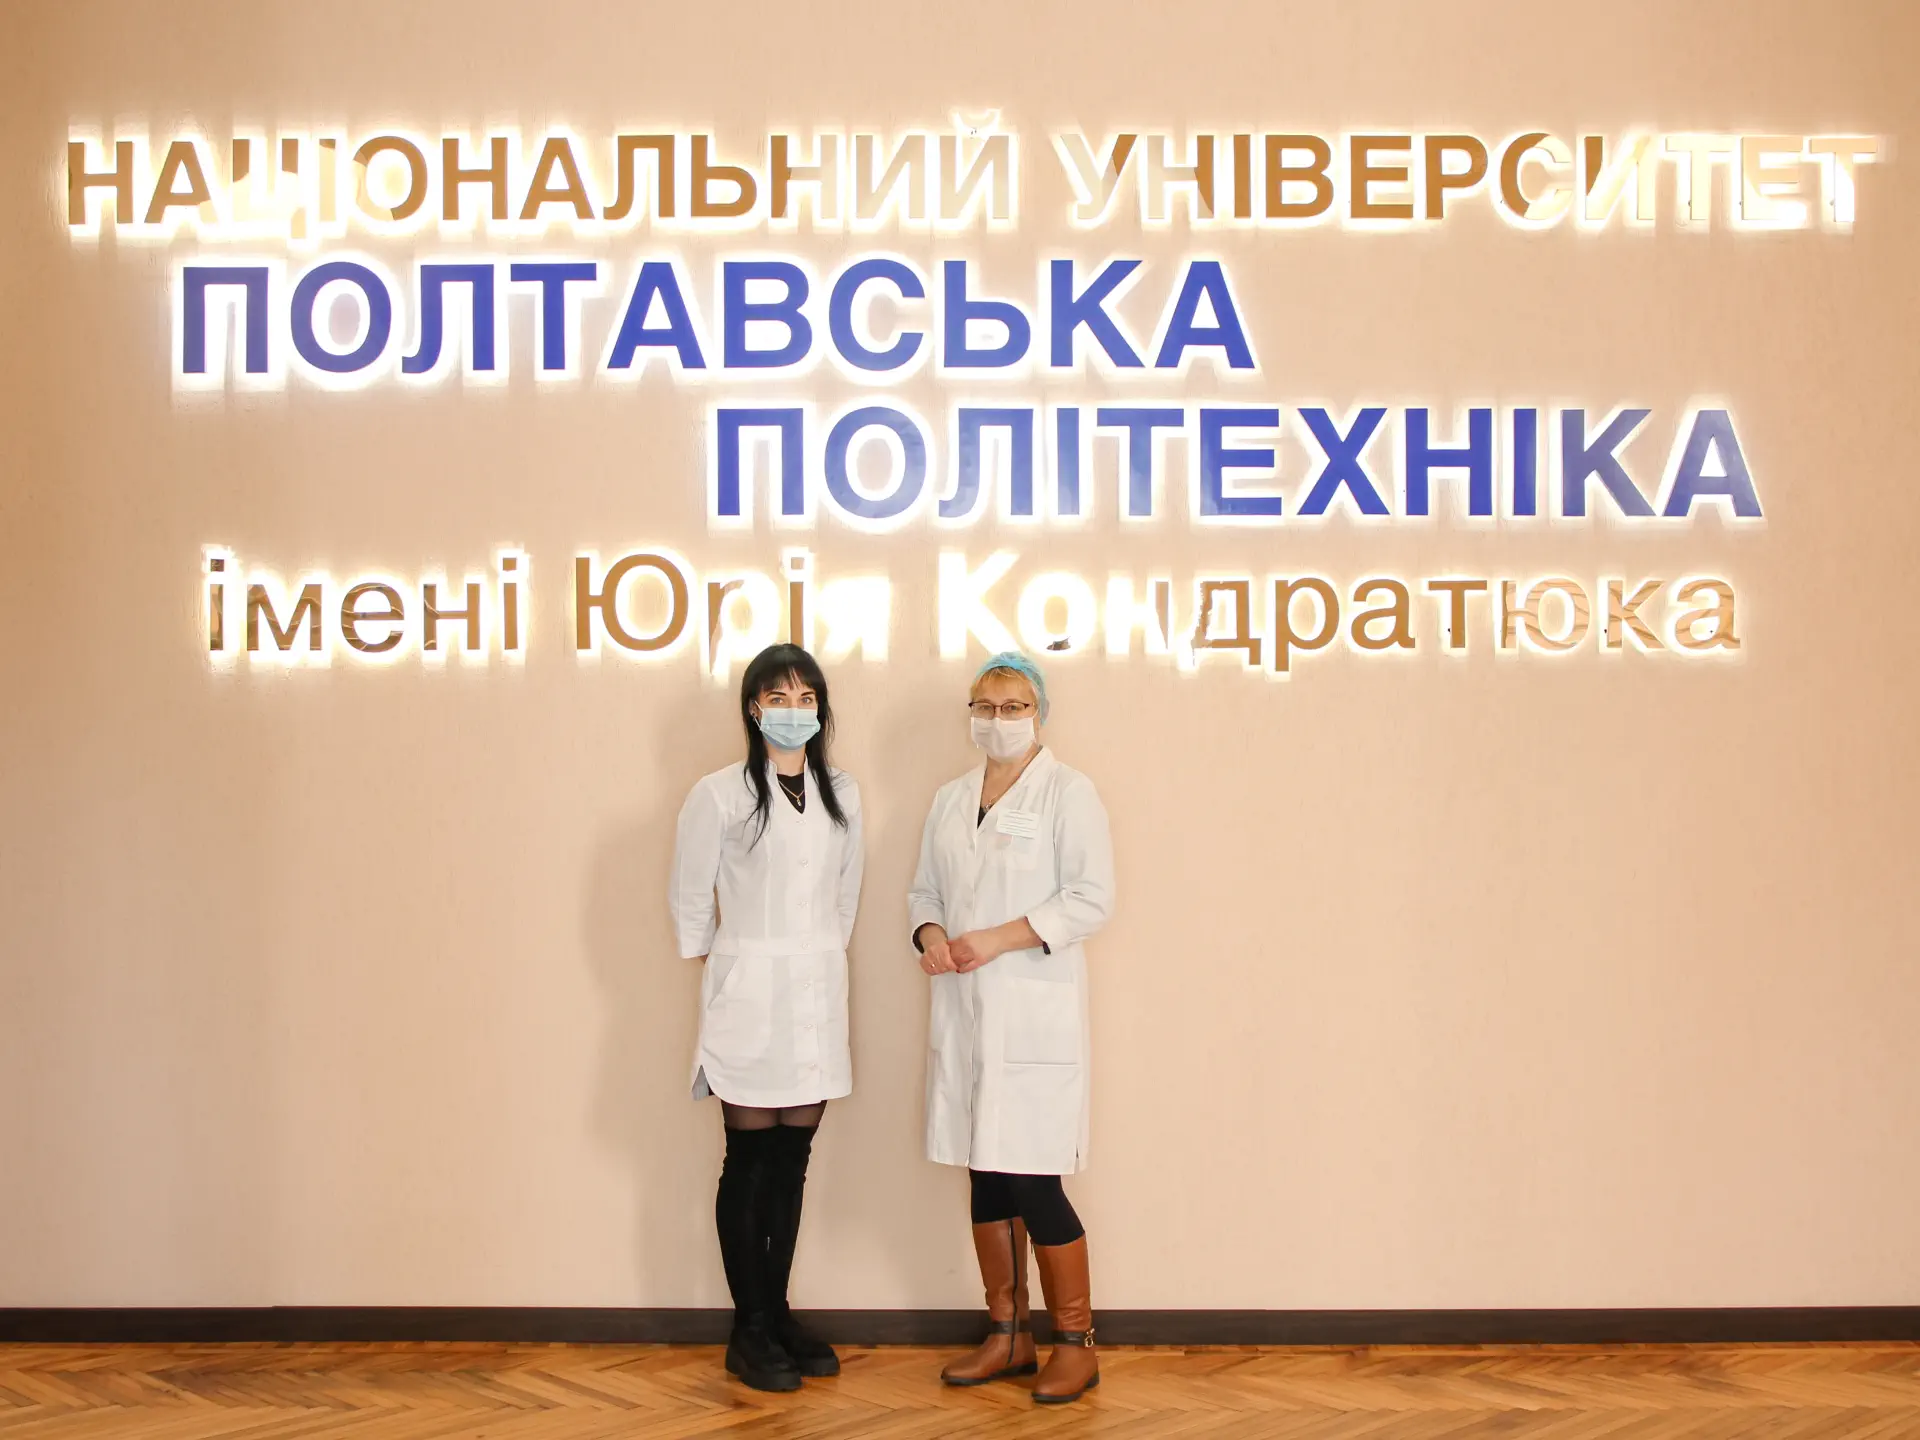 Polytechnic students are vaccinated at the university mobile vaccination center